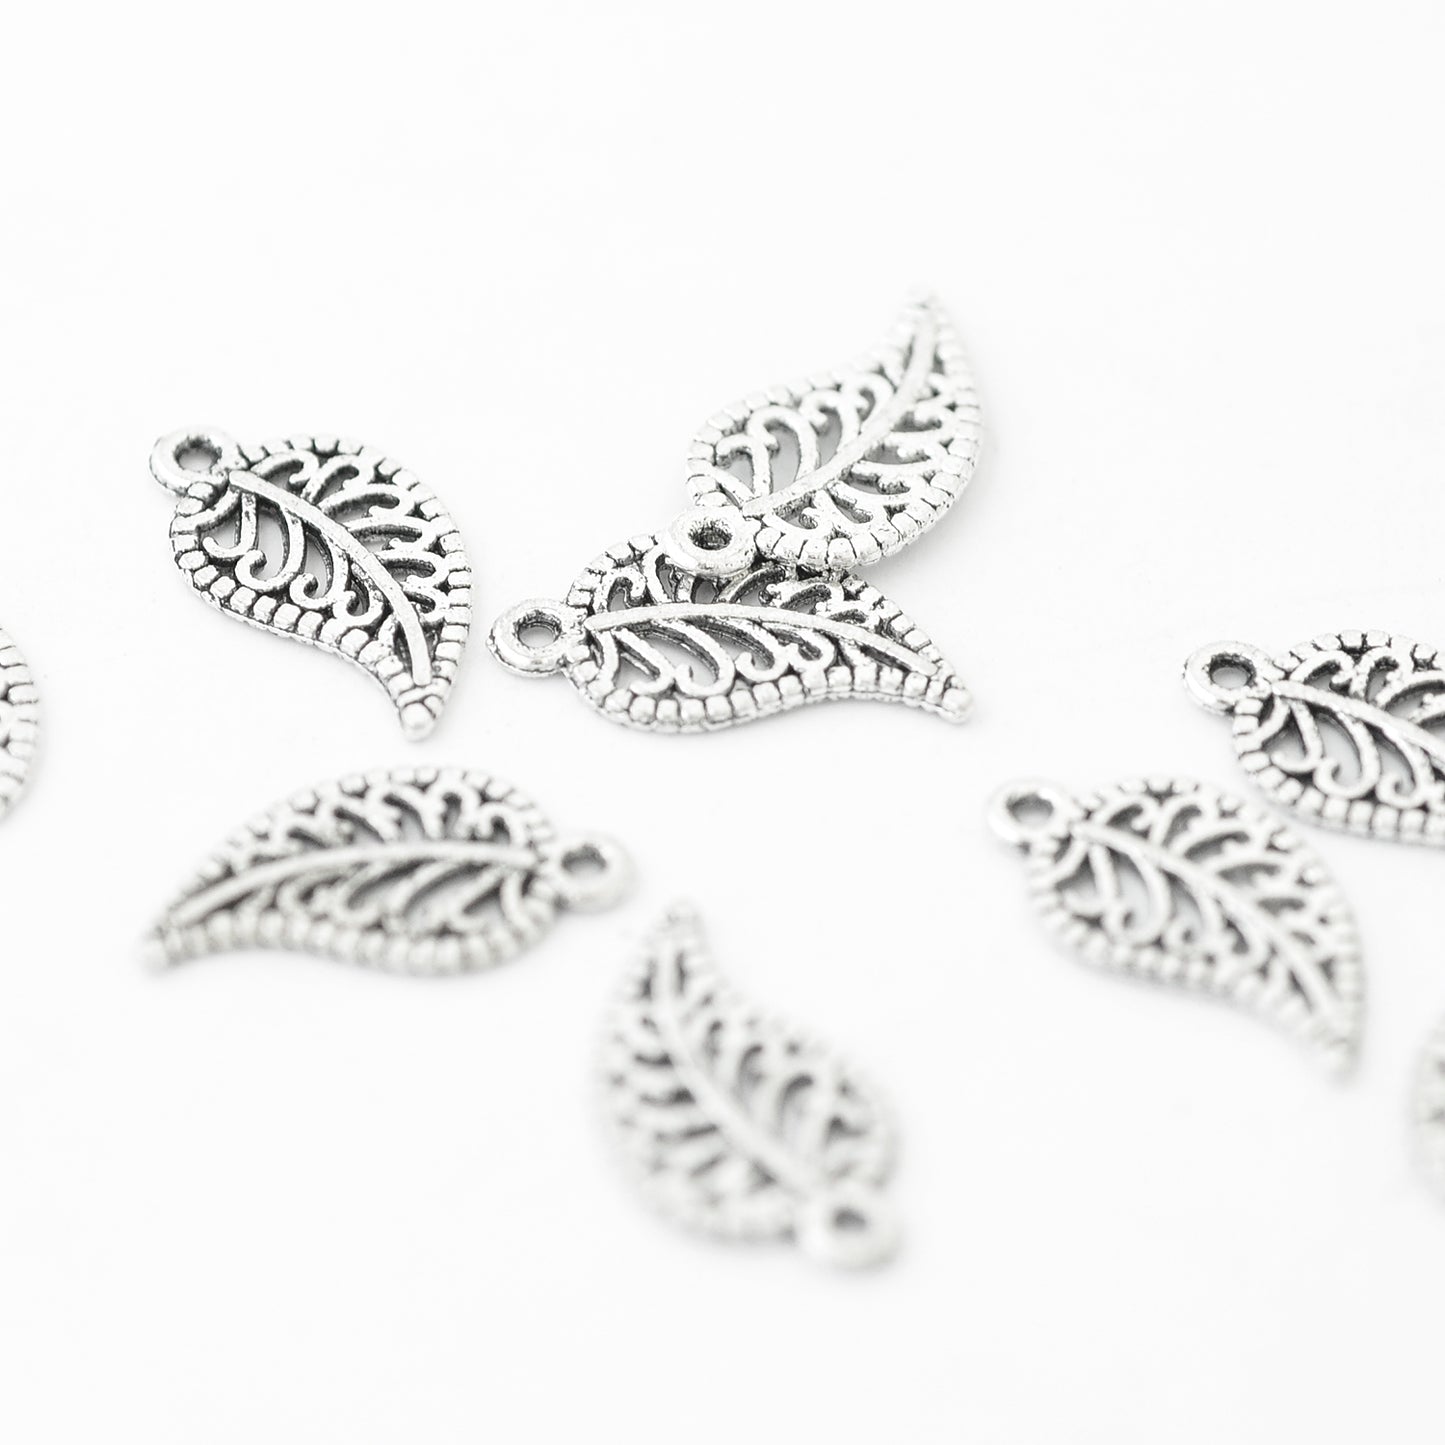 Leaf pendant / silver colored / 16 mm